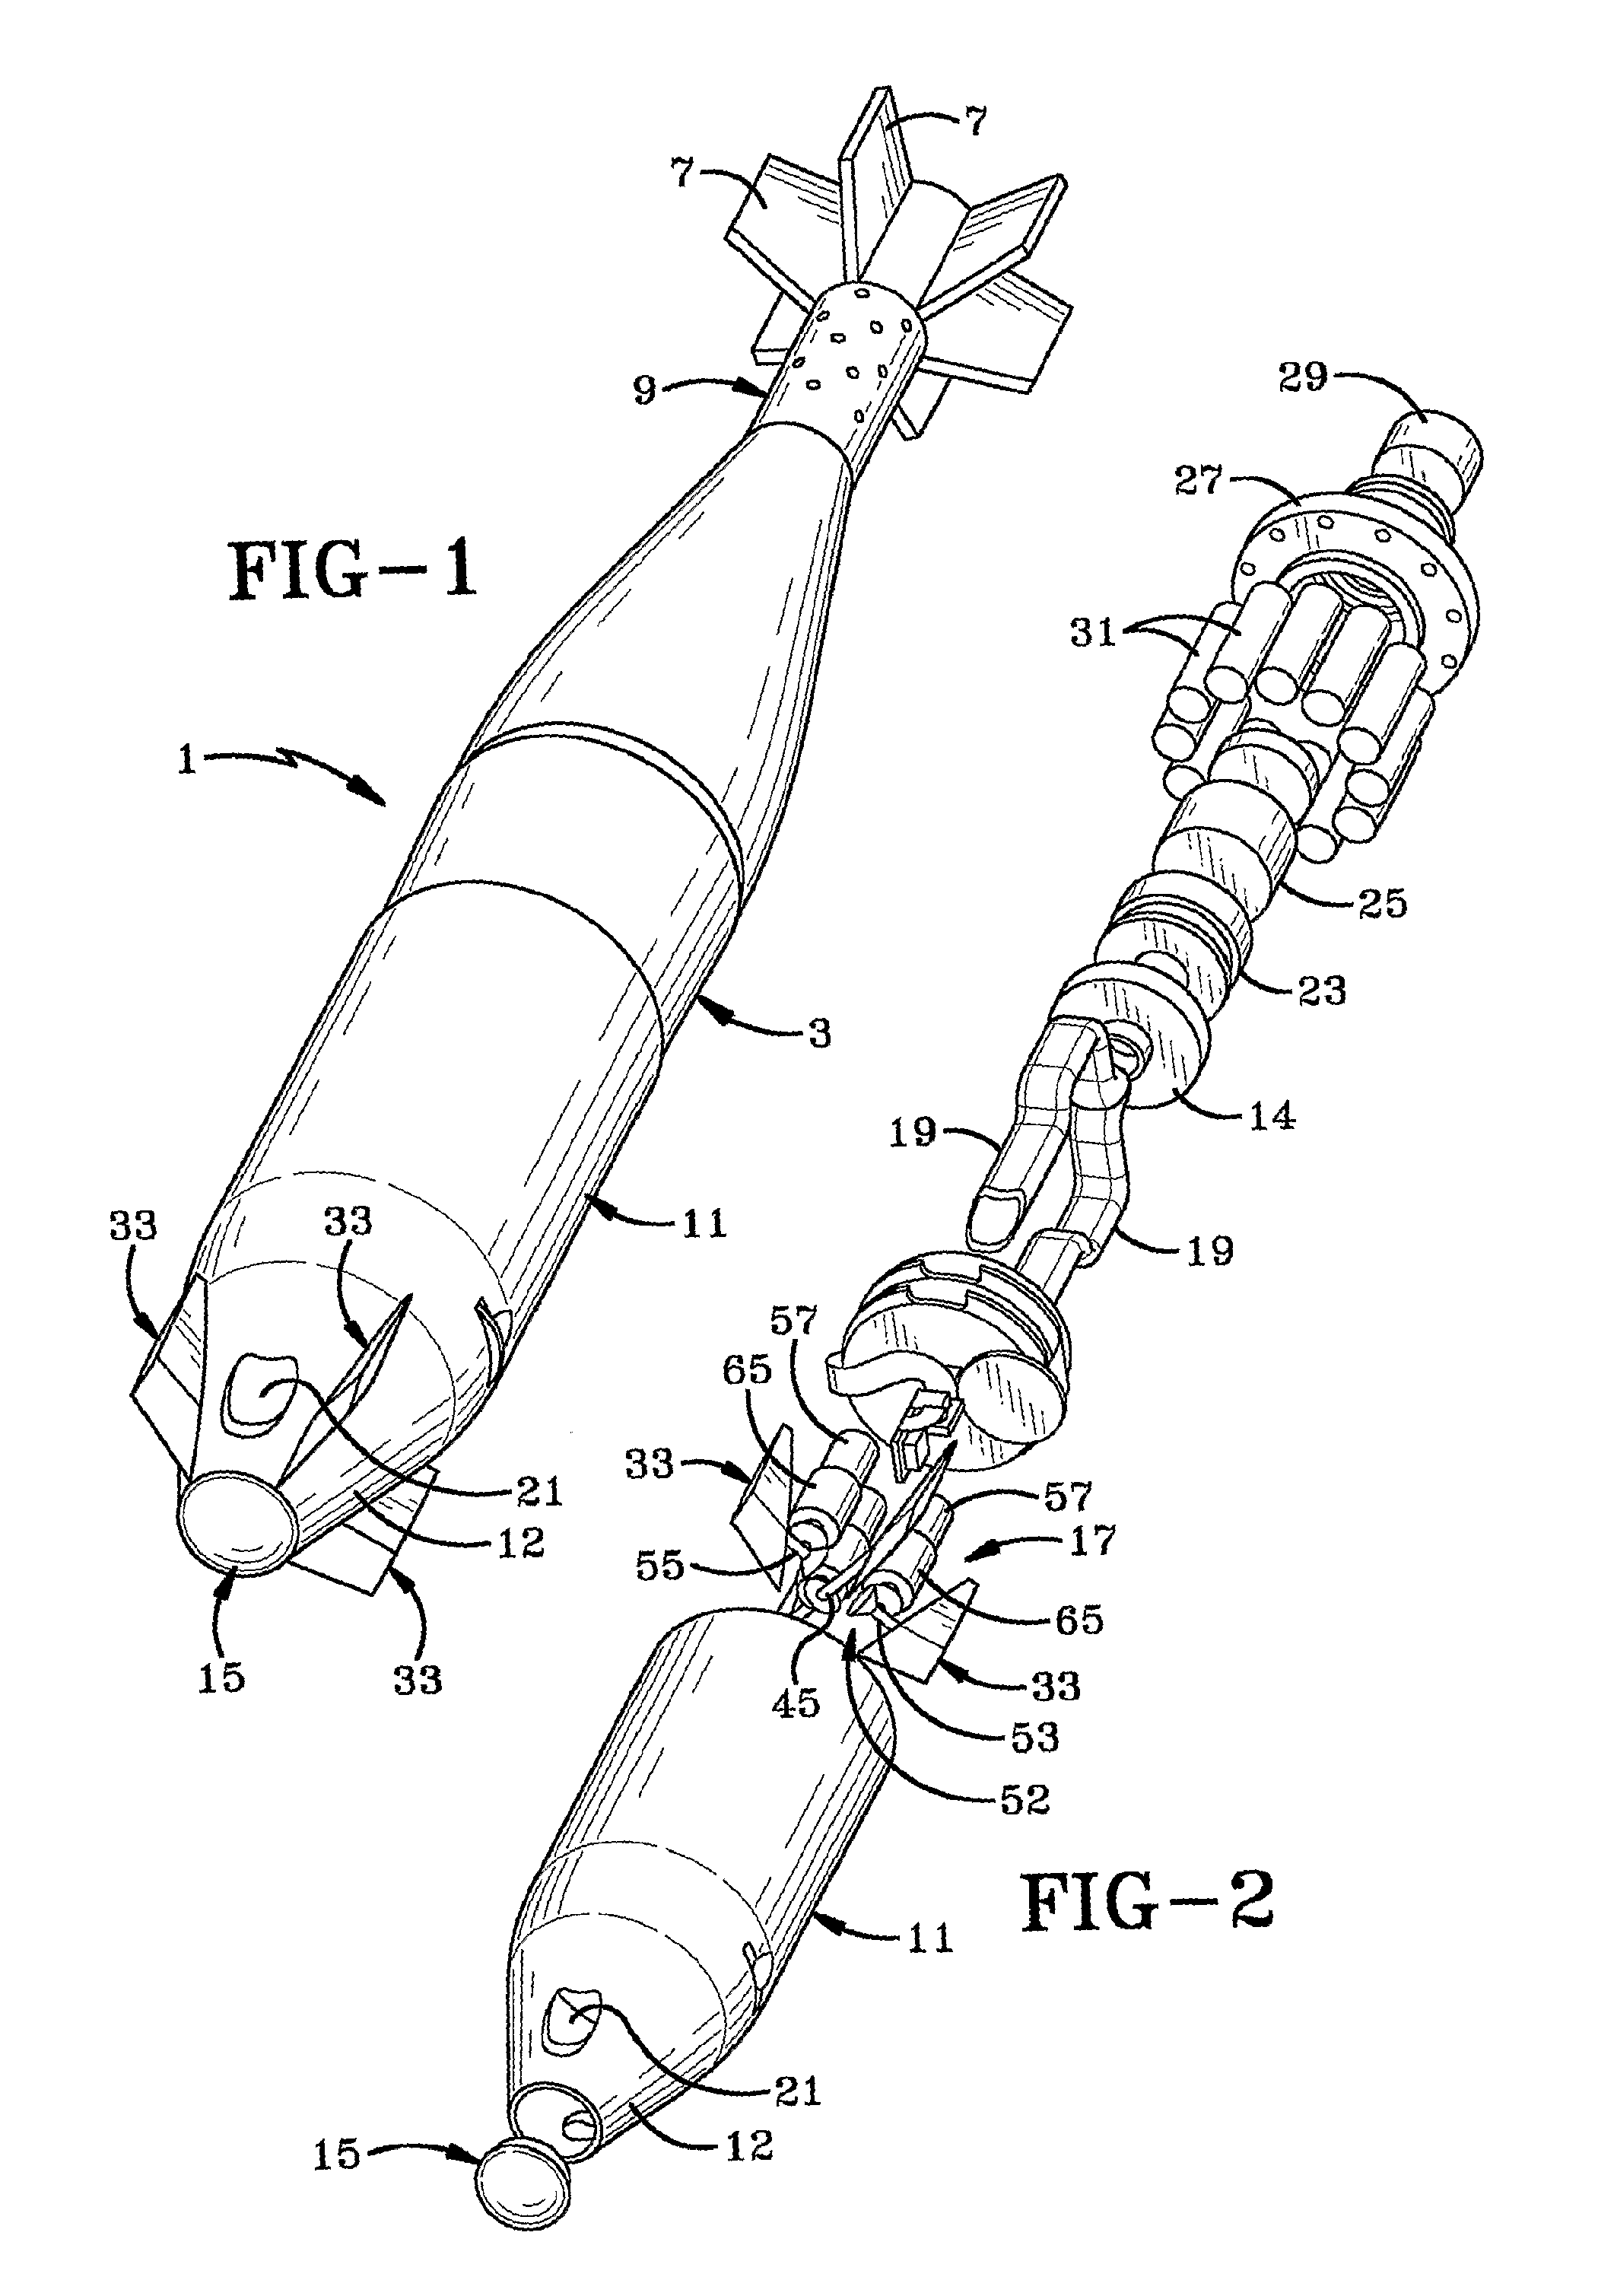 Three Axis Aerodynamic Control of Guided Munitions